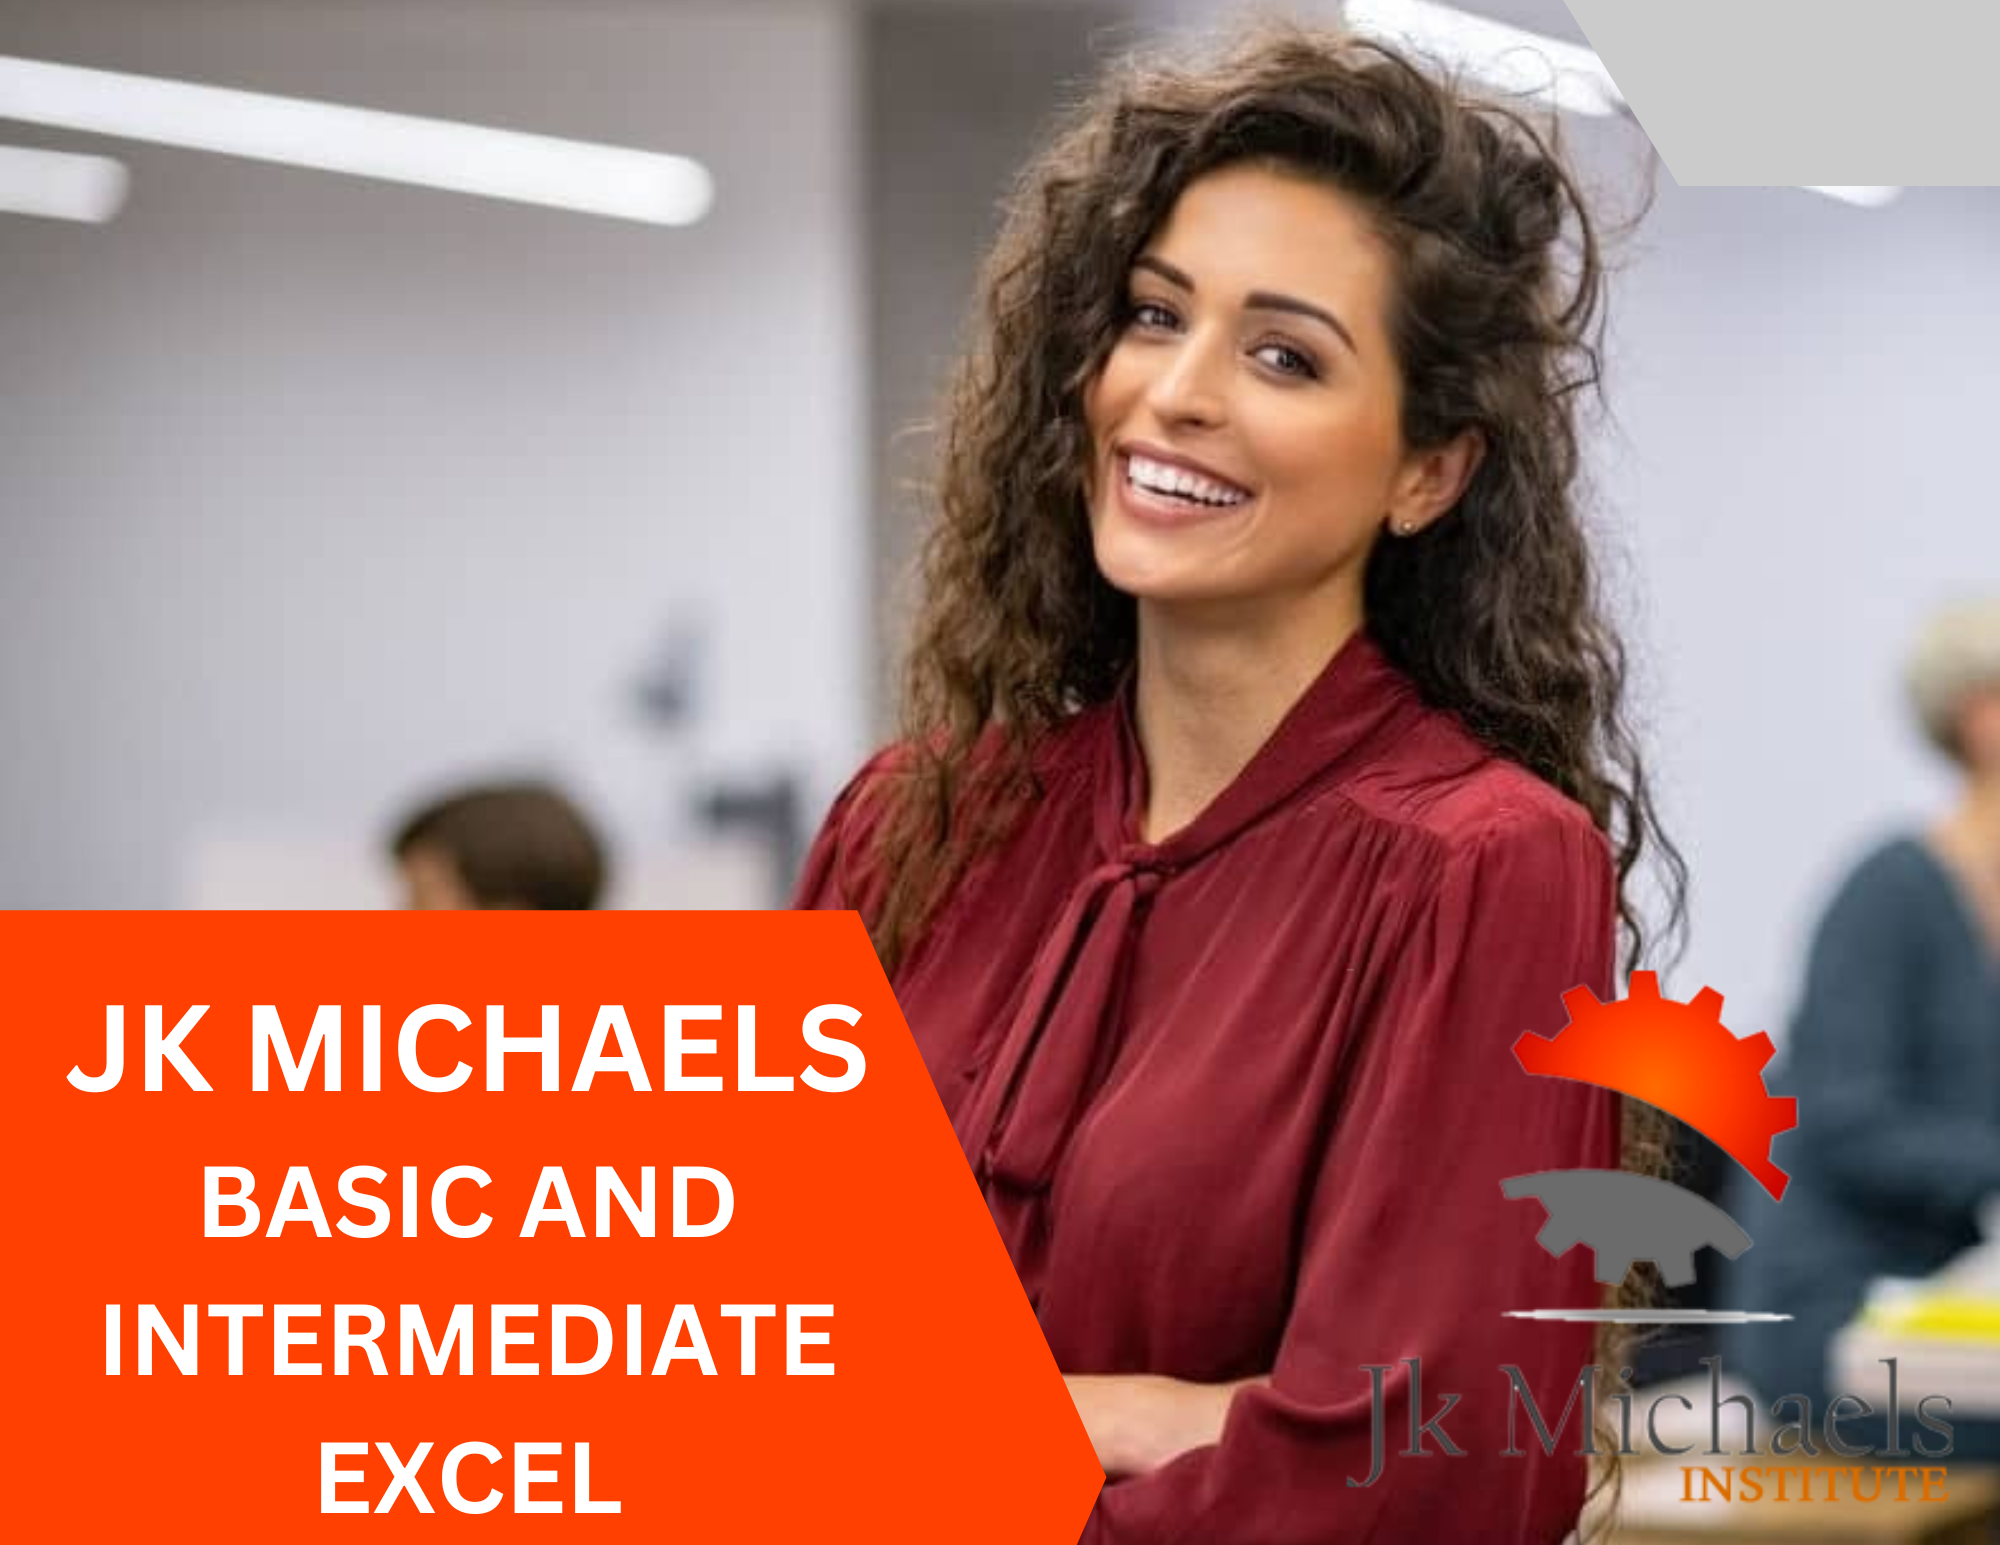 BASIC AND INTERMEDIATE EXCEL